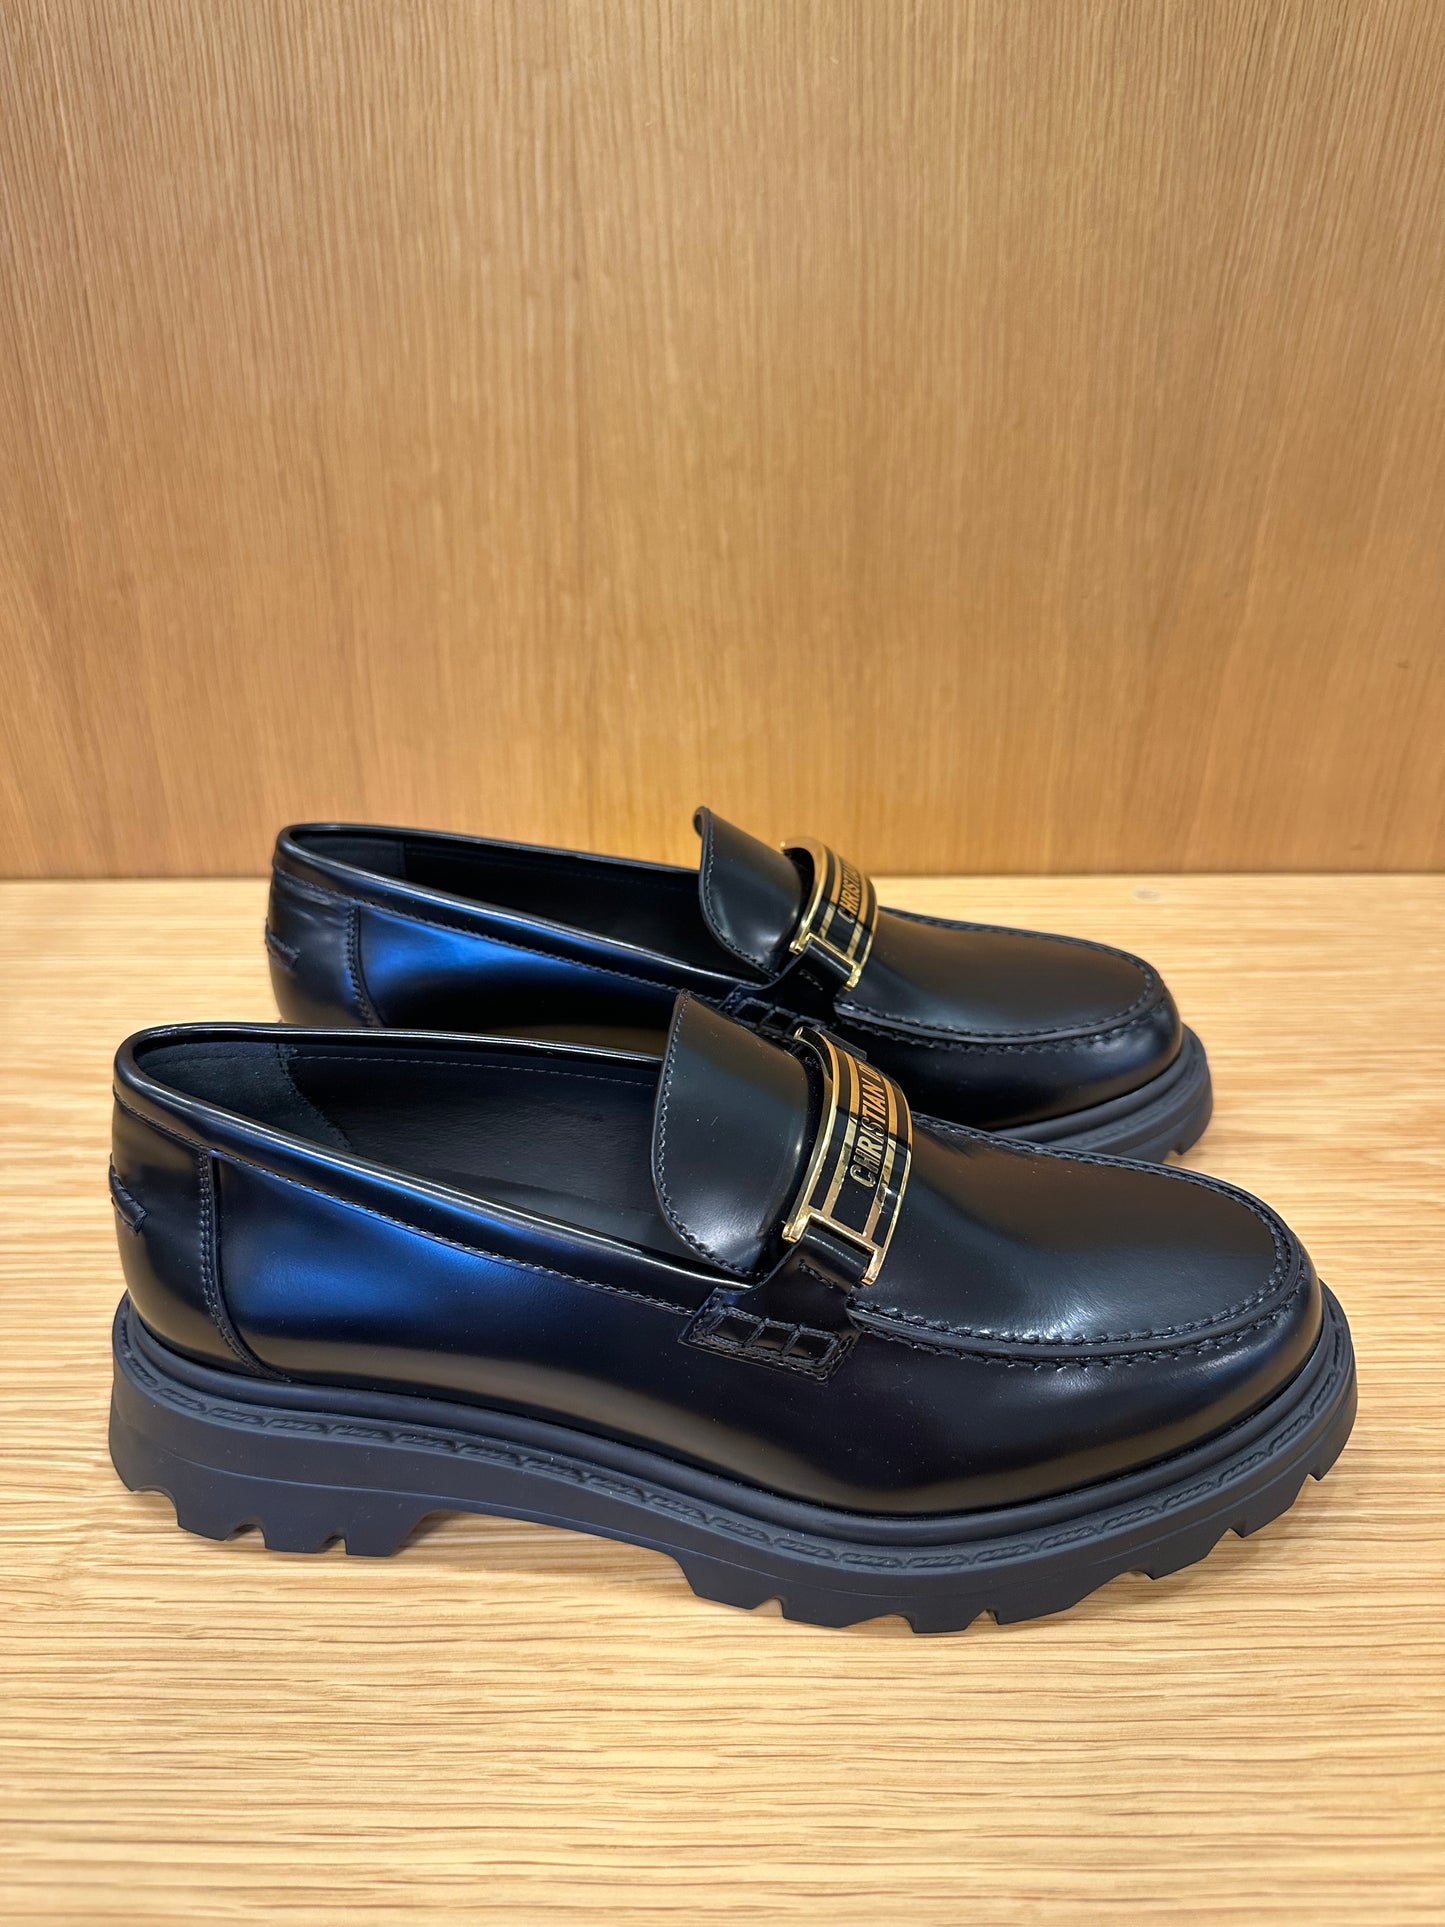 DIOR New Flat code Loafers Size US8-EU38.5